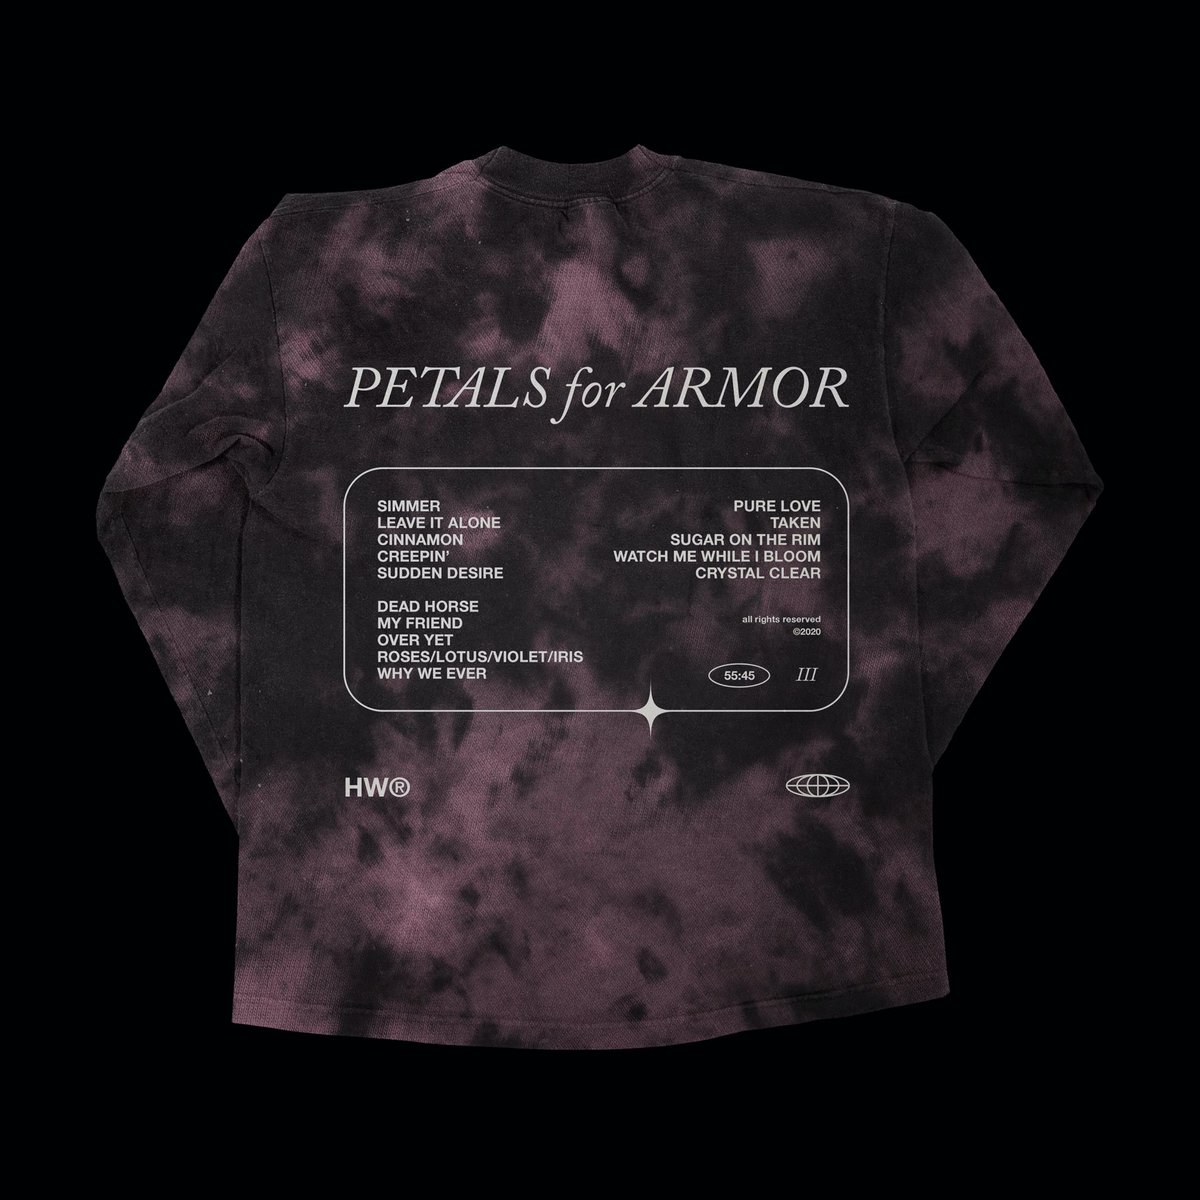 Very excited to reveal the Petals For Armor longsleeve I designed for the one and only @yelyahwilliams - available to pre order now! store.petalsforarmor.com/petals-trackli…